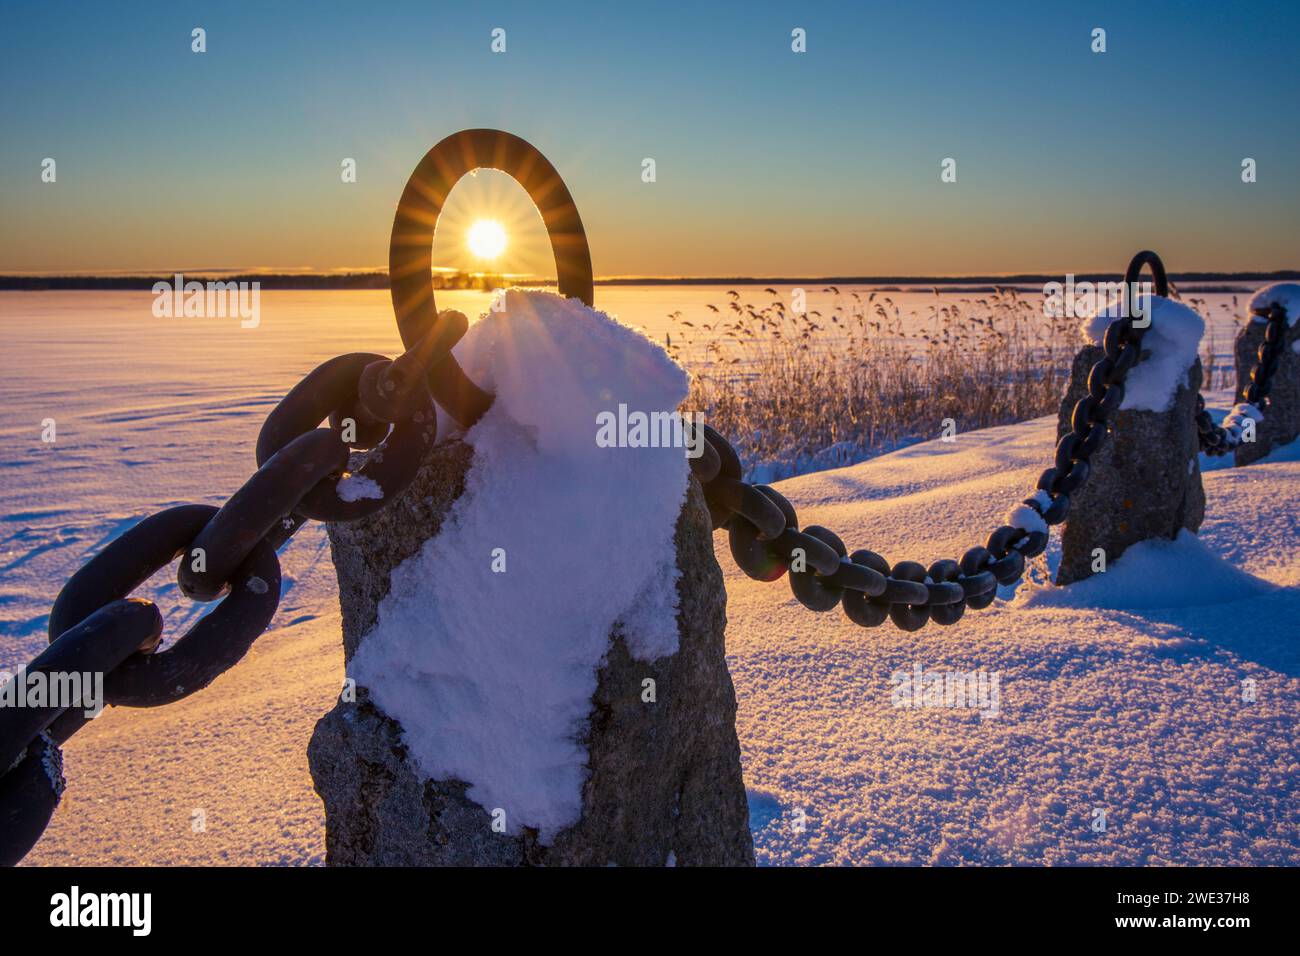 A beautiful sunset over a snow-covered field with a chain in the foreground. Sandviken, Sweden Stock Photo